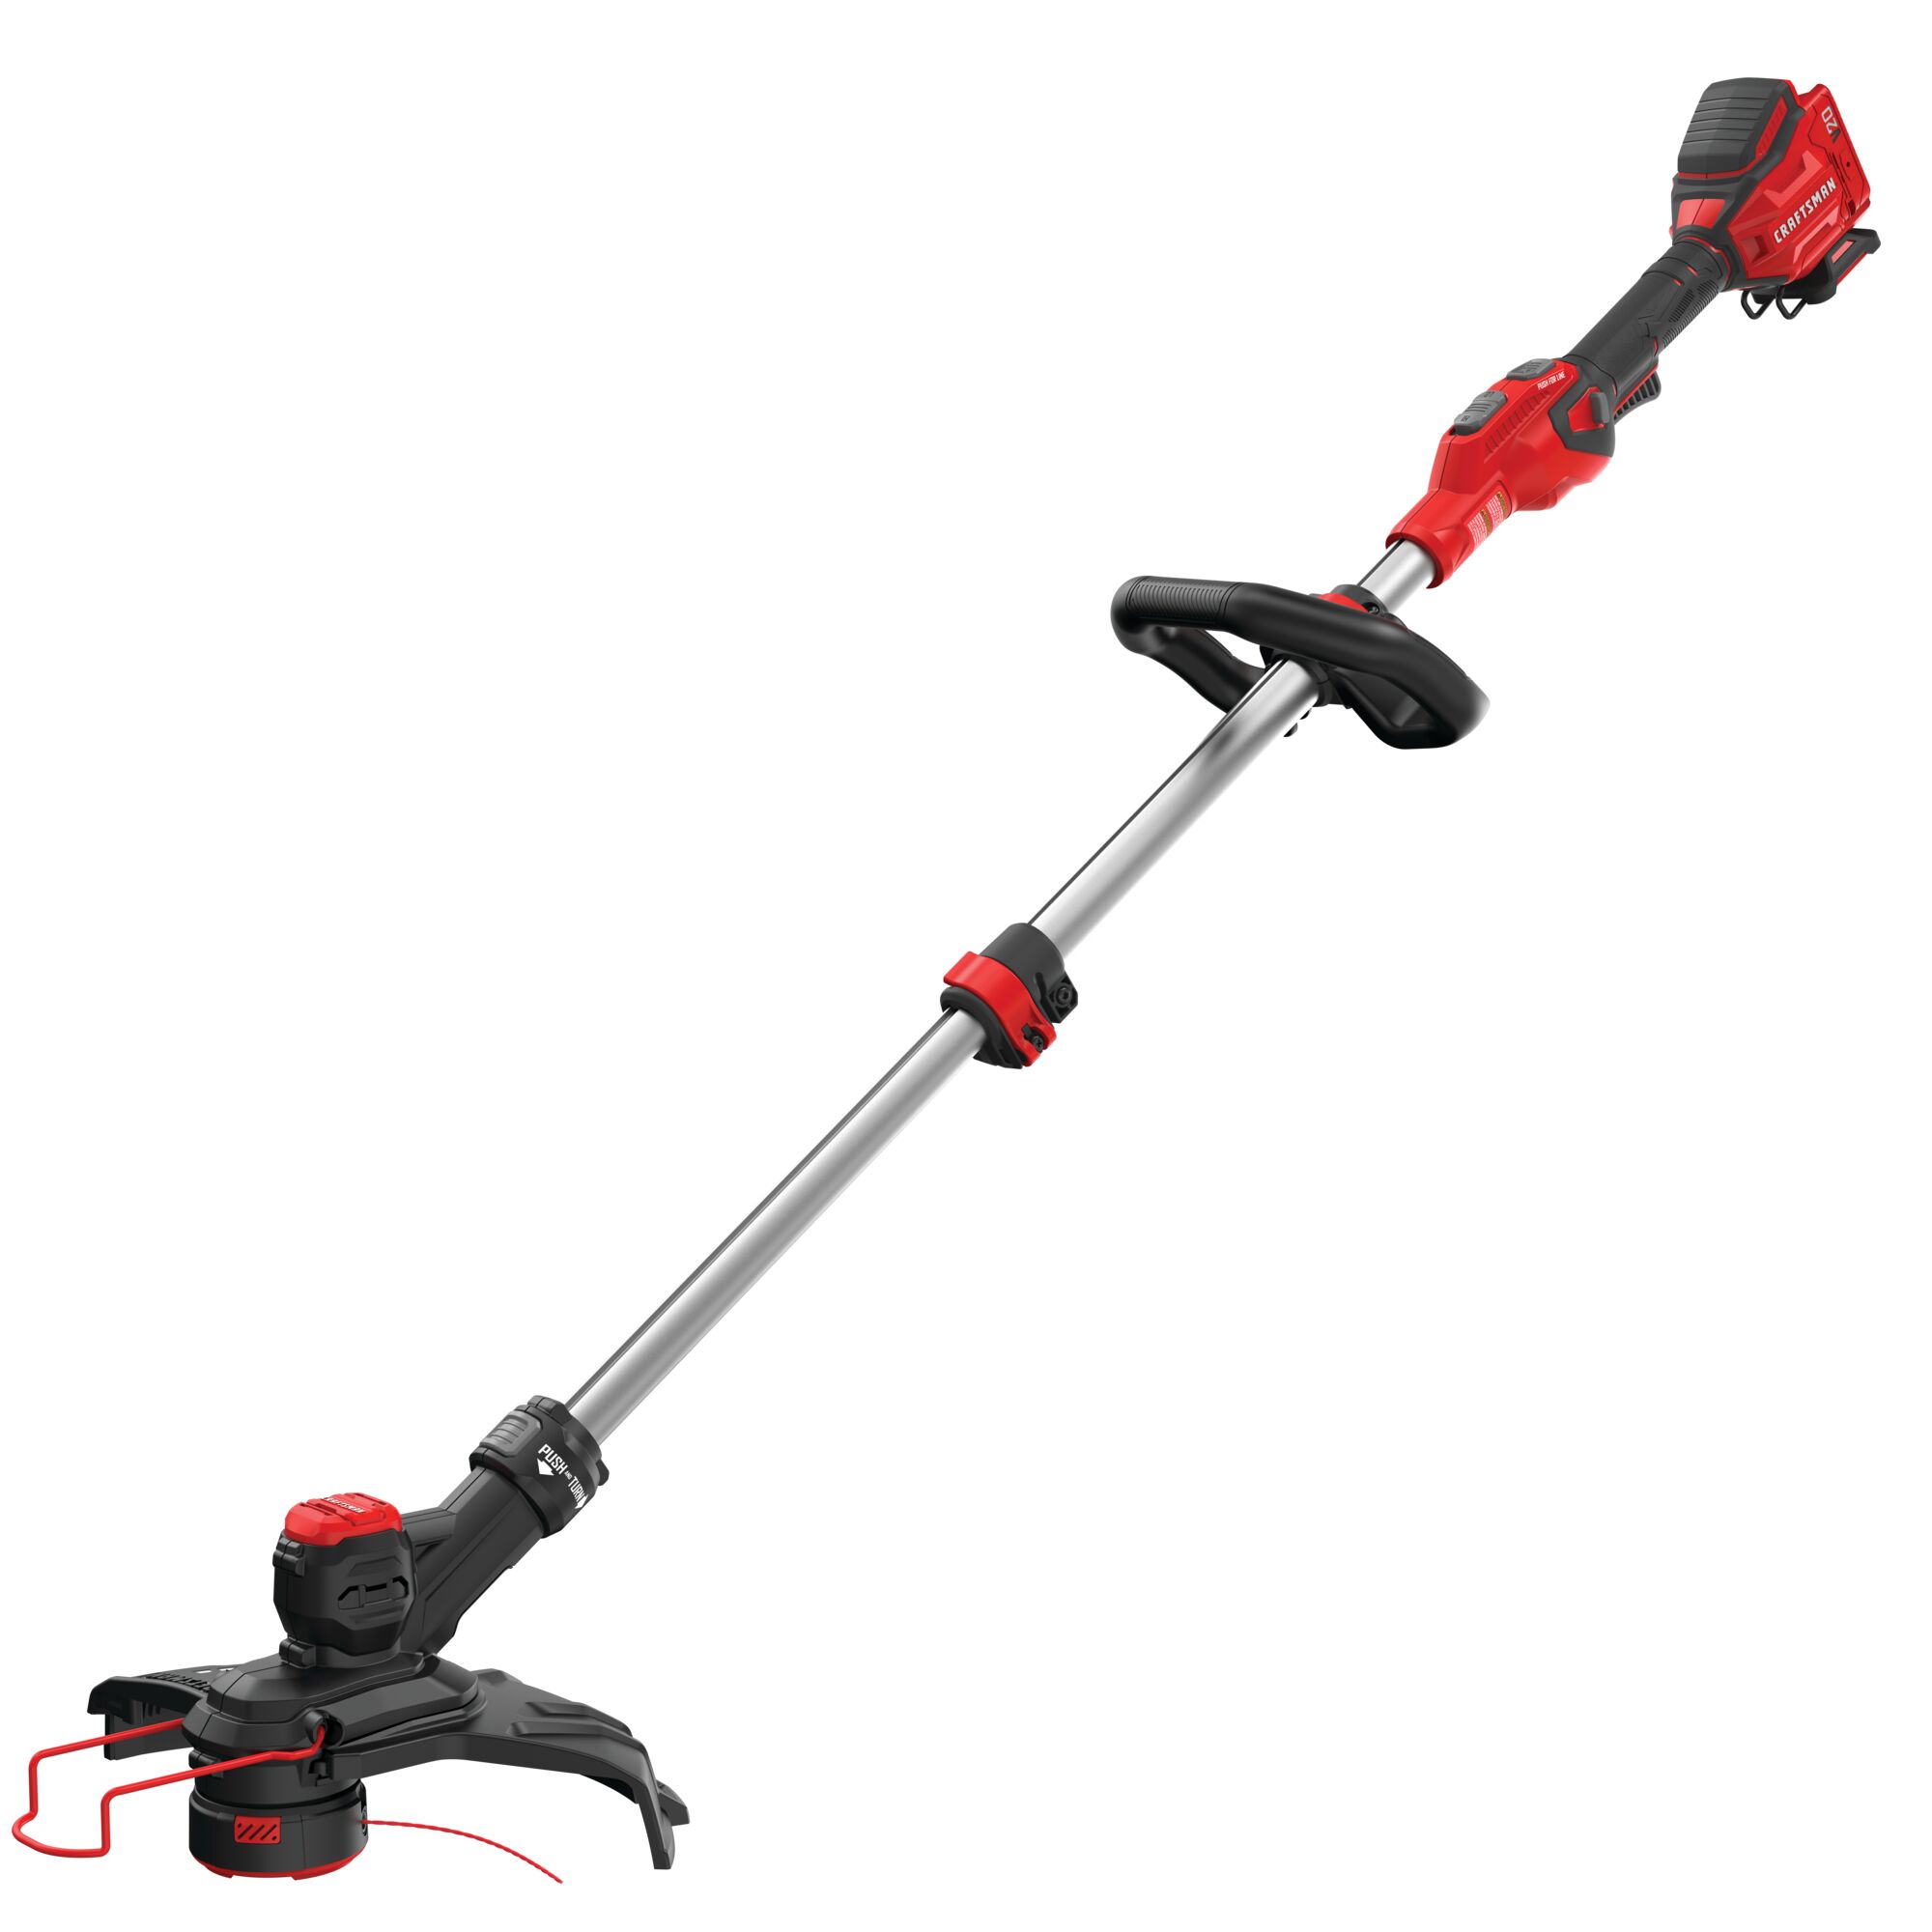 Left profile of 20 volt cordless 13 inch weedwacker string trimmer edger with push button feed.